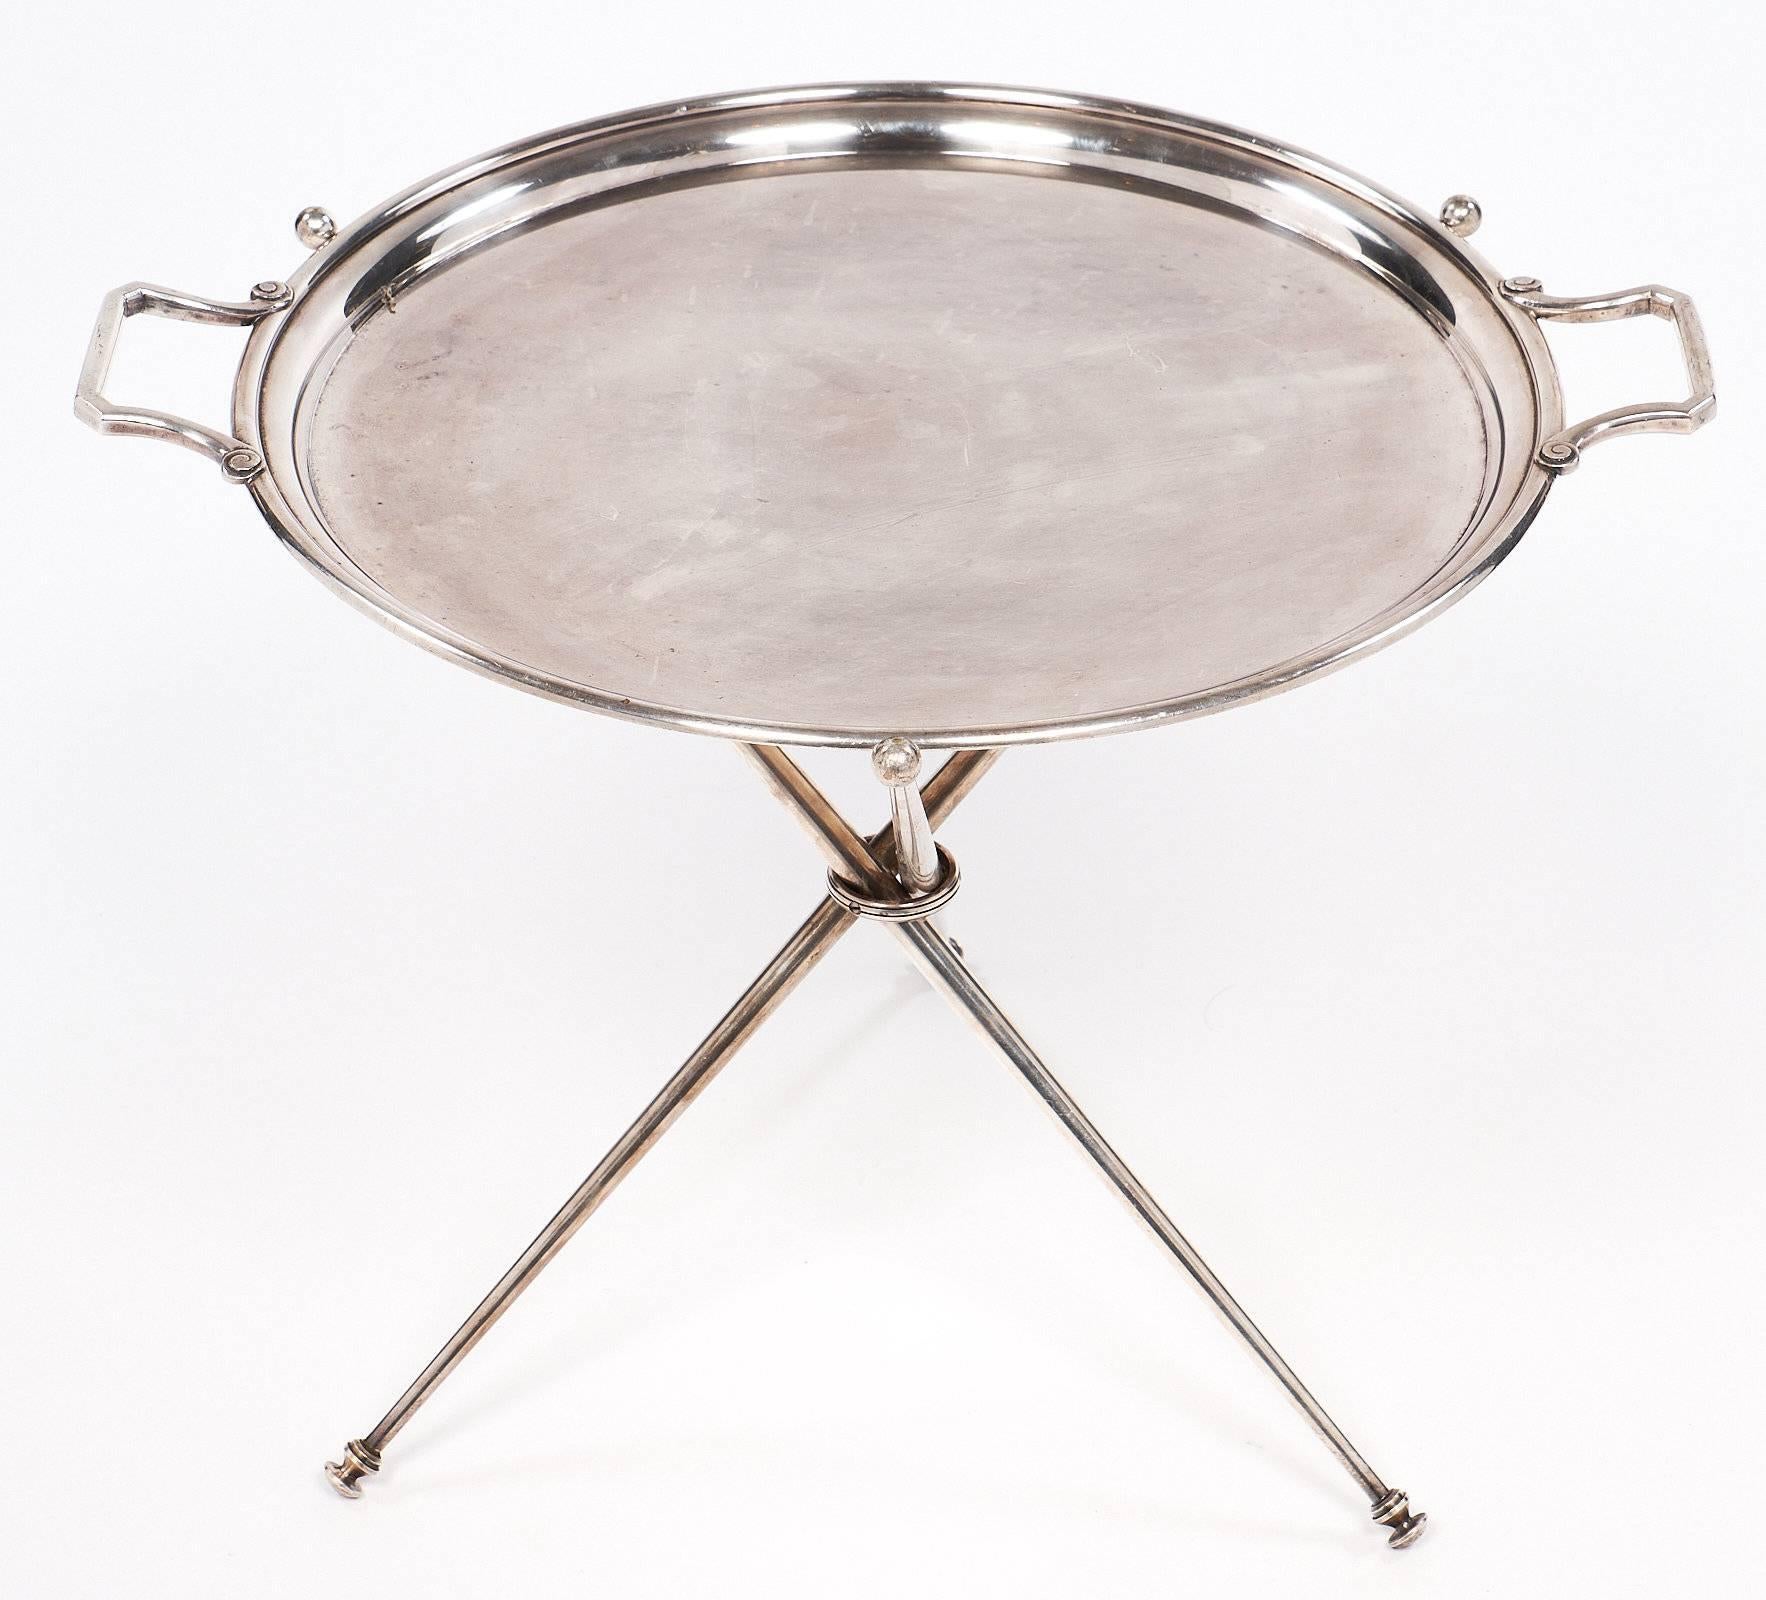 Mid-20th Century Art Deco Period French Tripod Tray Table